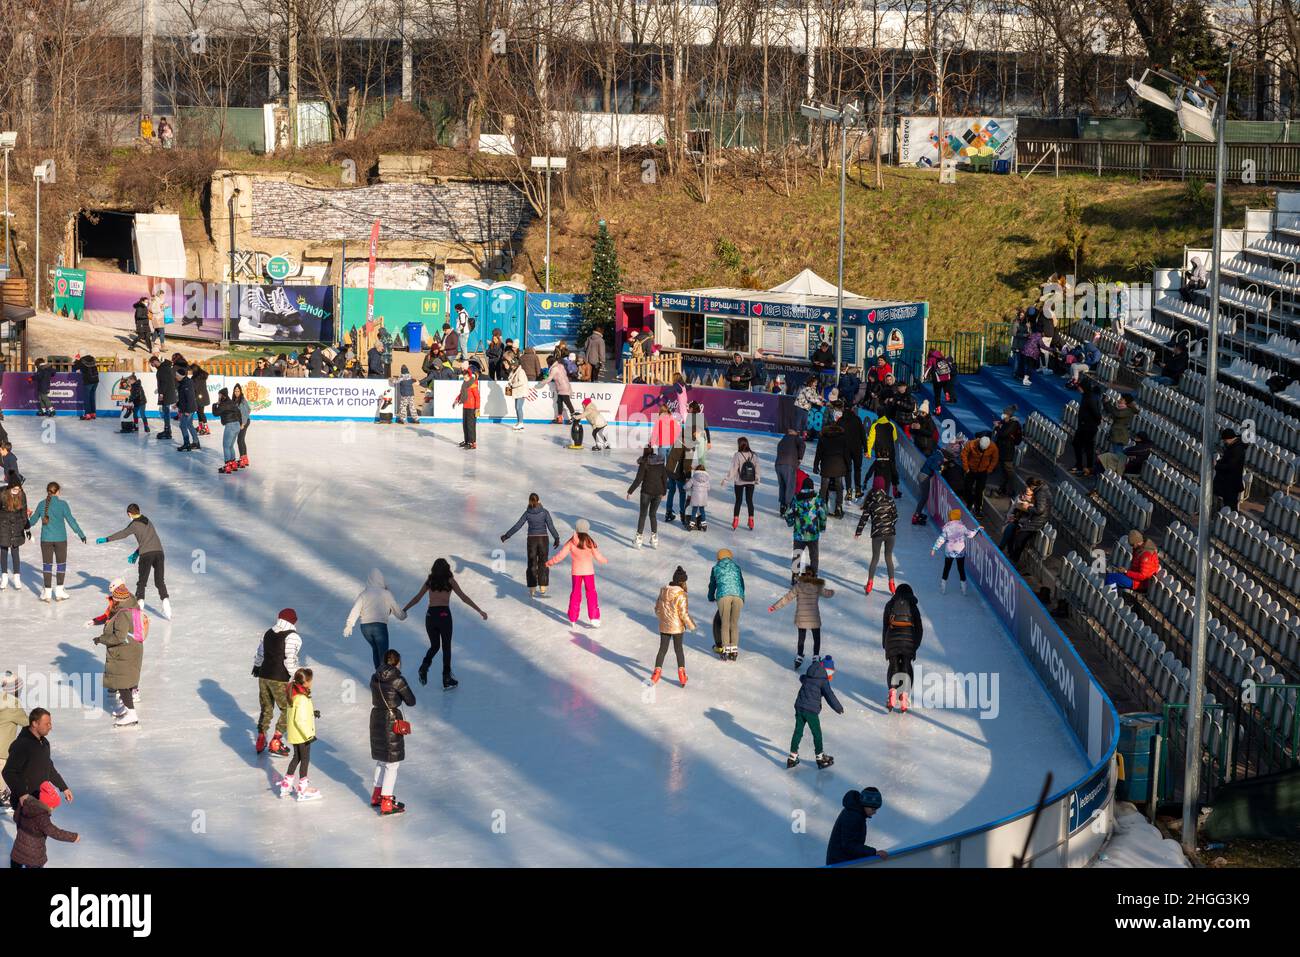 People having fun at the Yunak stadium outdoor ice skating rink on sunny winter day in Sofia, Bulgaria Stock Photo